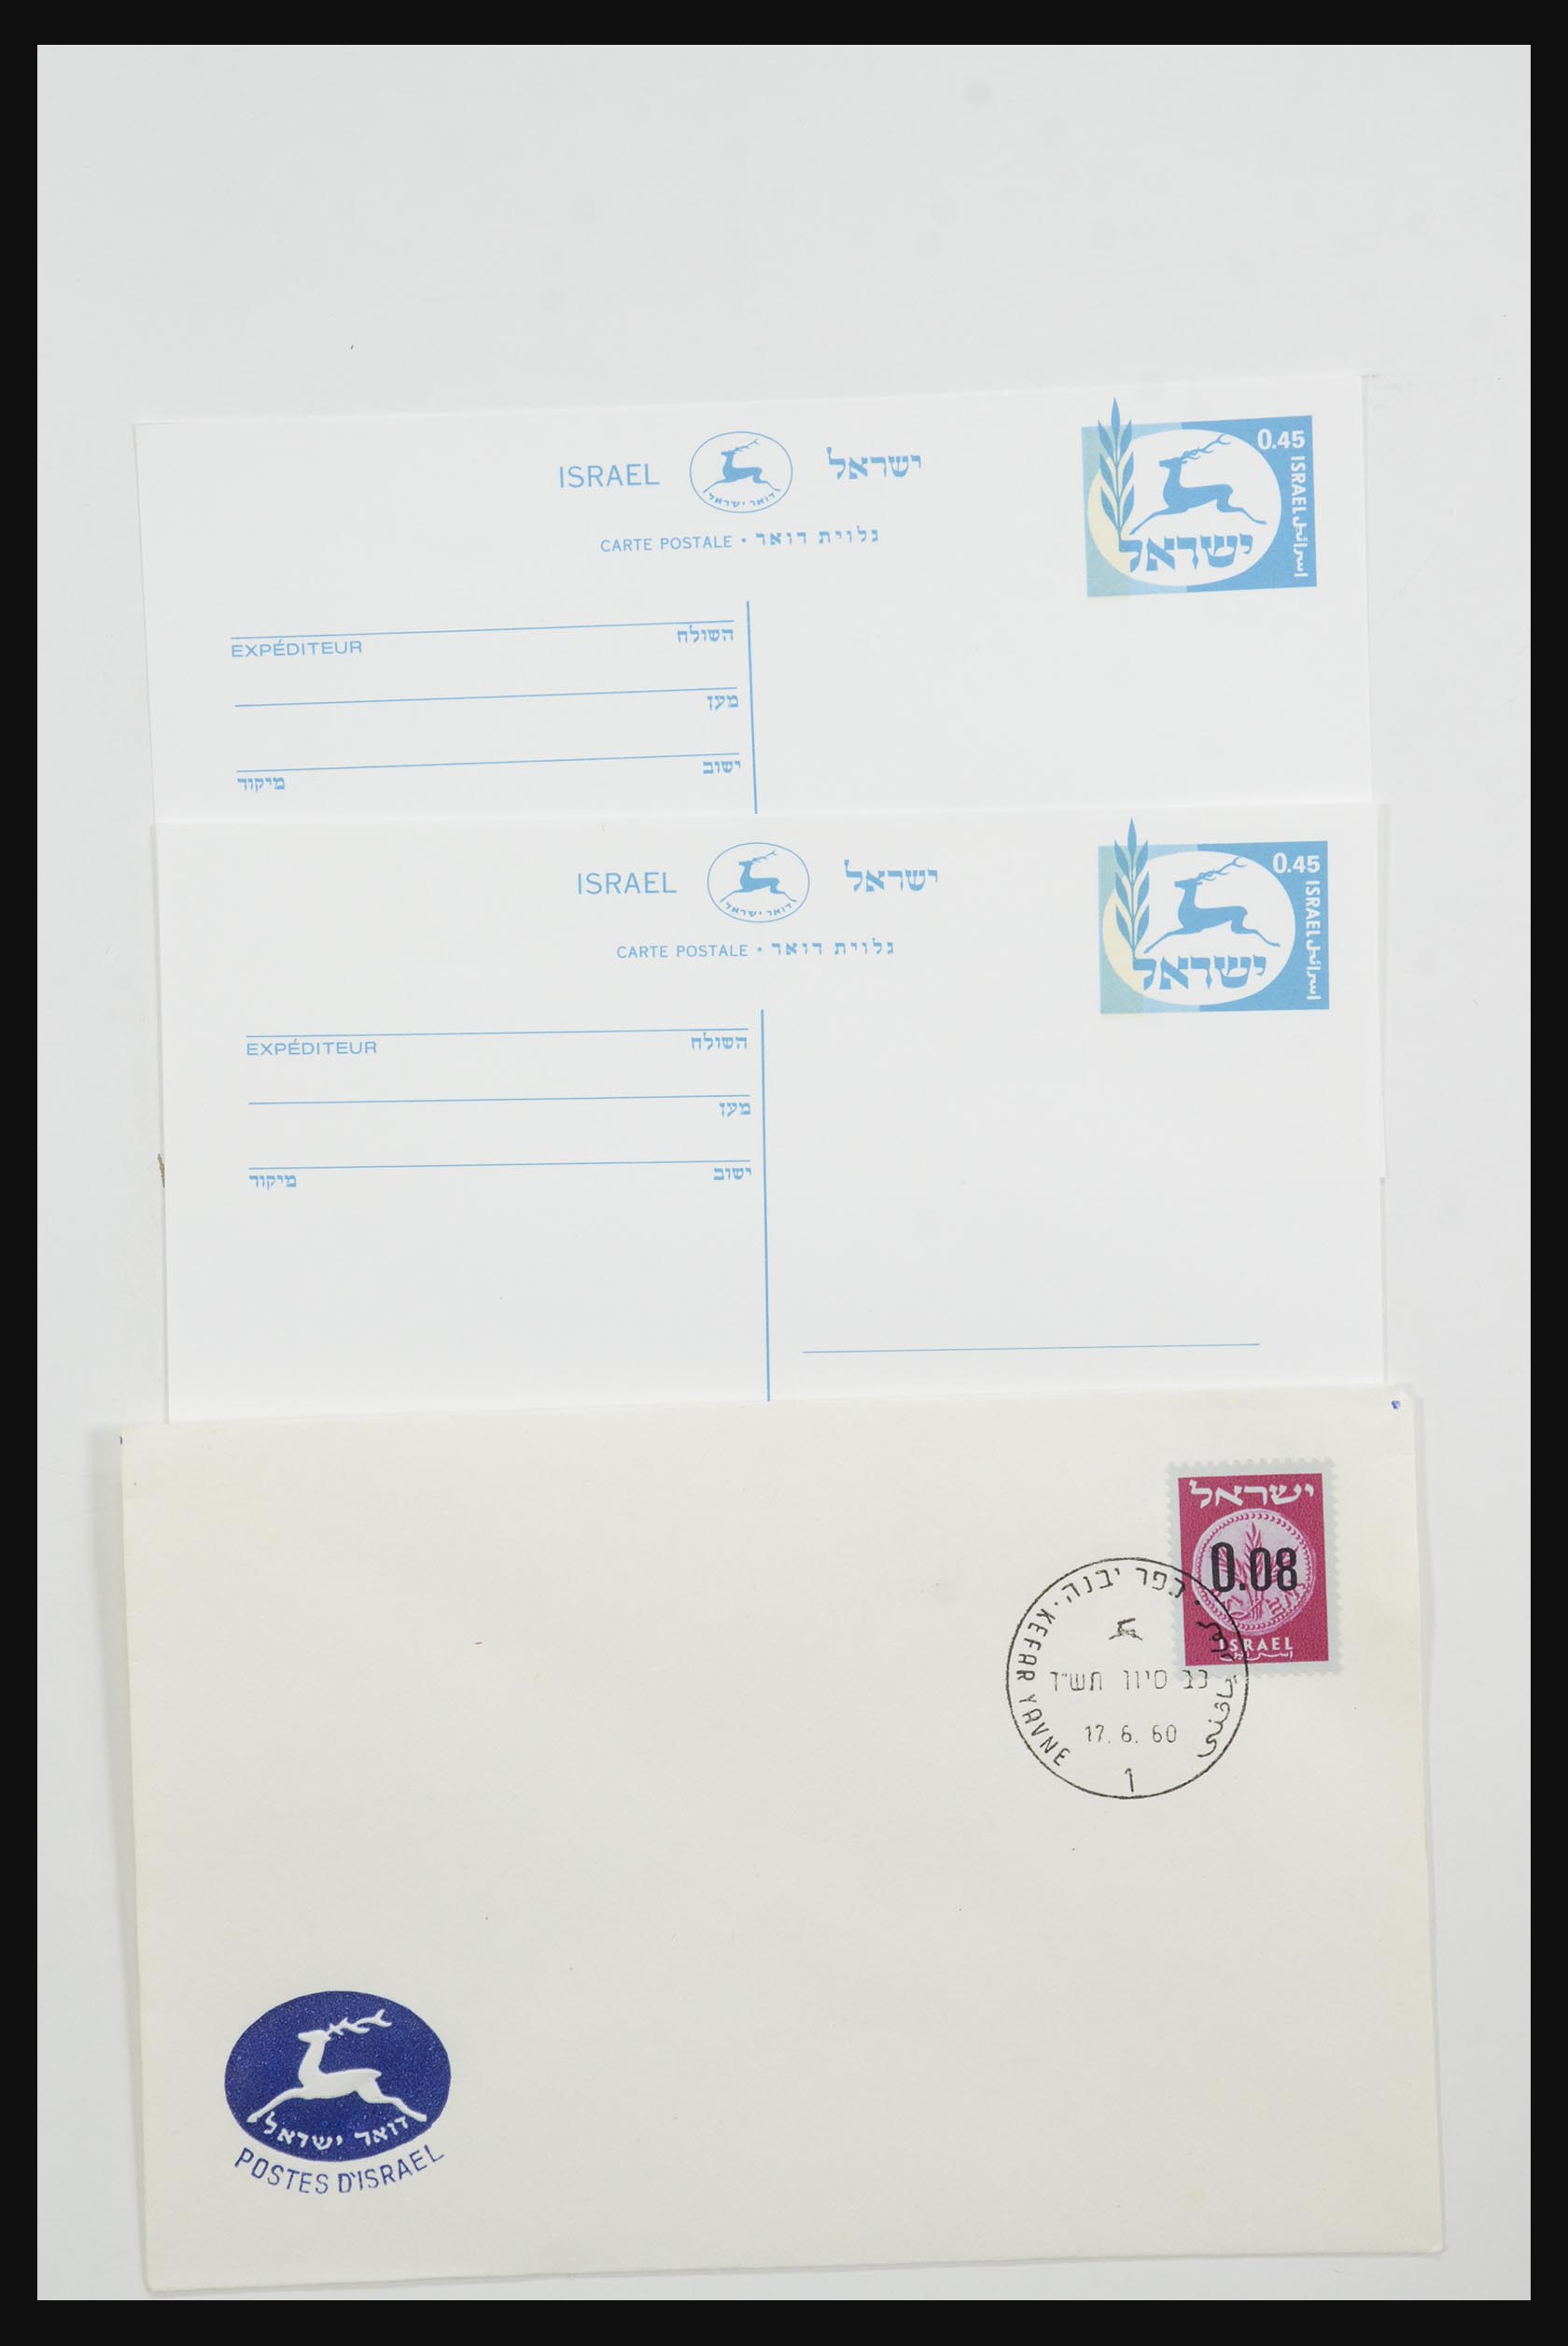 31924 016 - 31924 Israel first day cover collection 1957-2003.